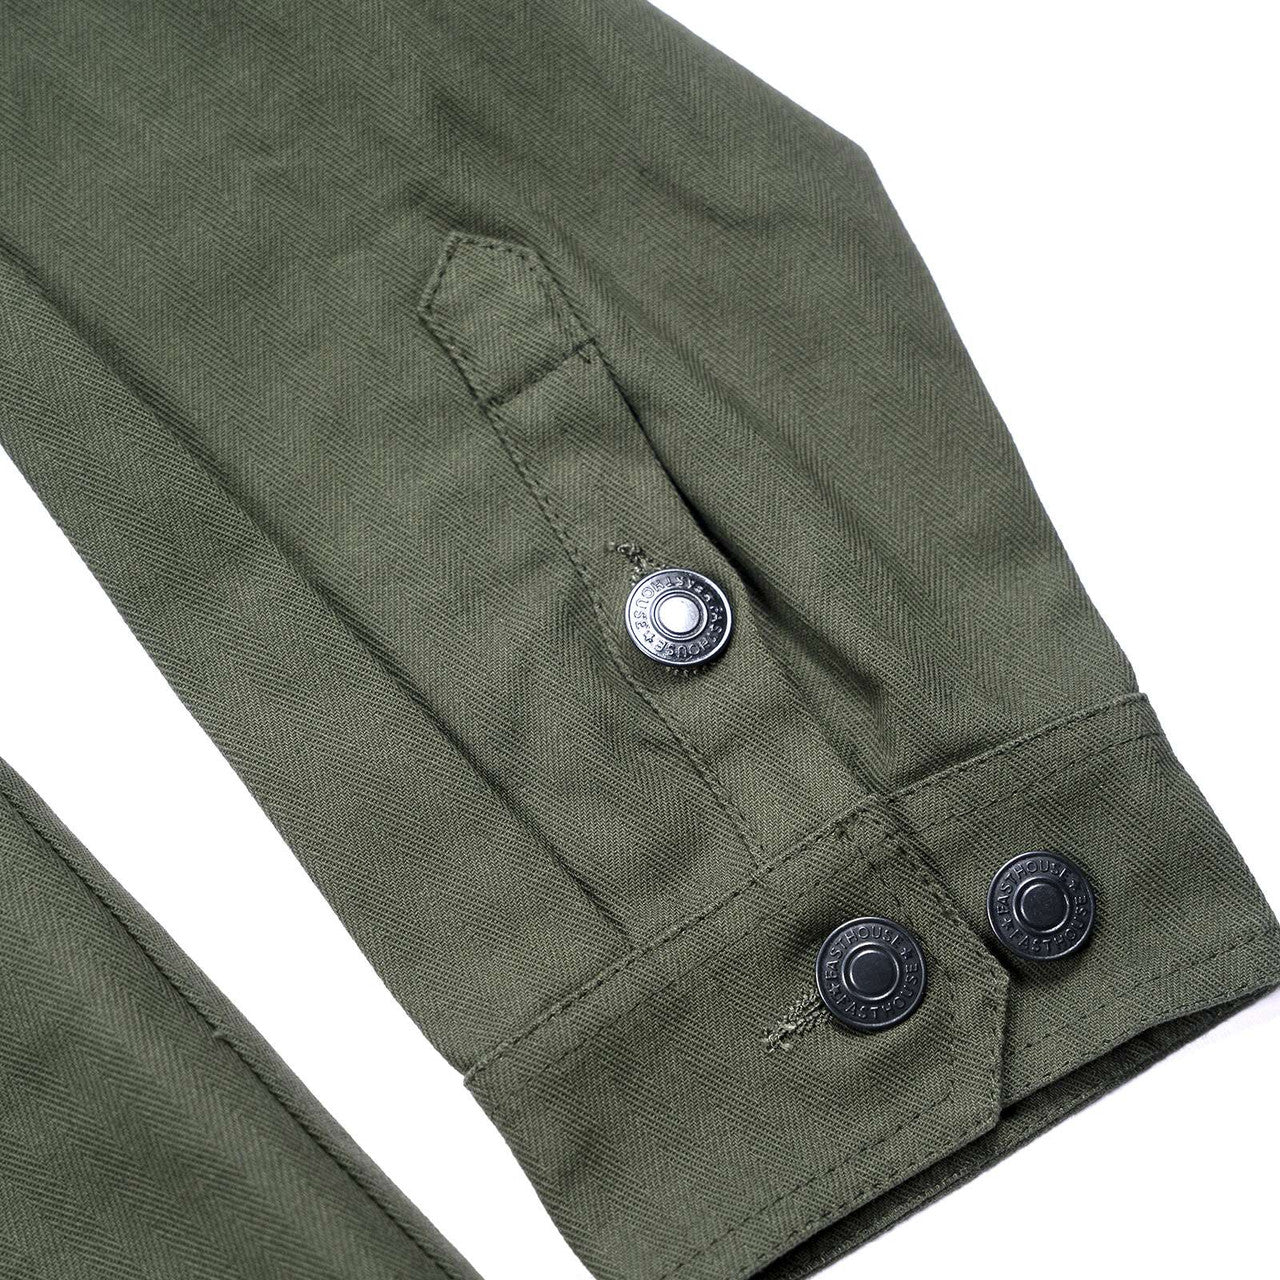 Fasthouse-Mens-Grafter-Chore-Coat-thyme-detail